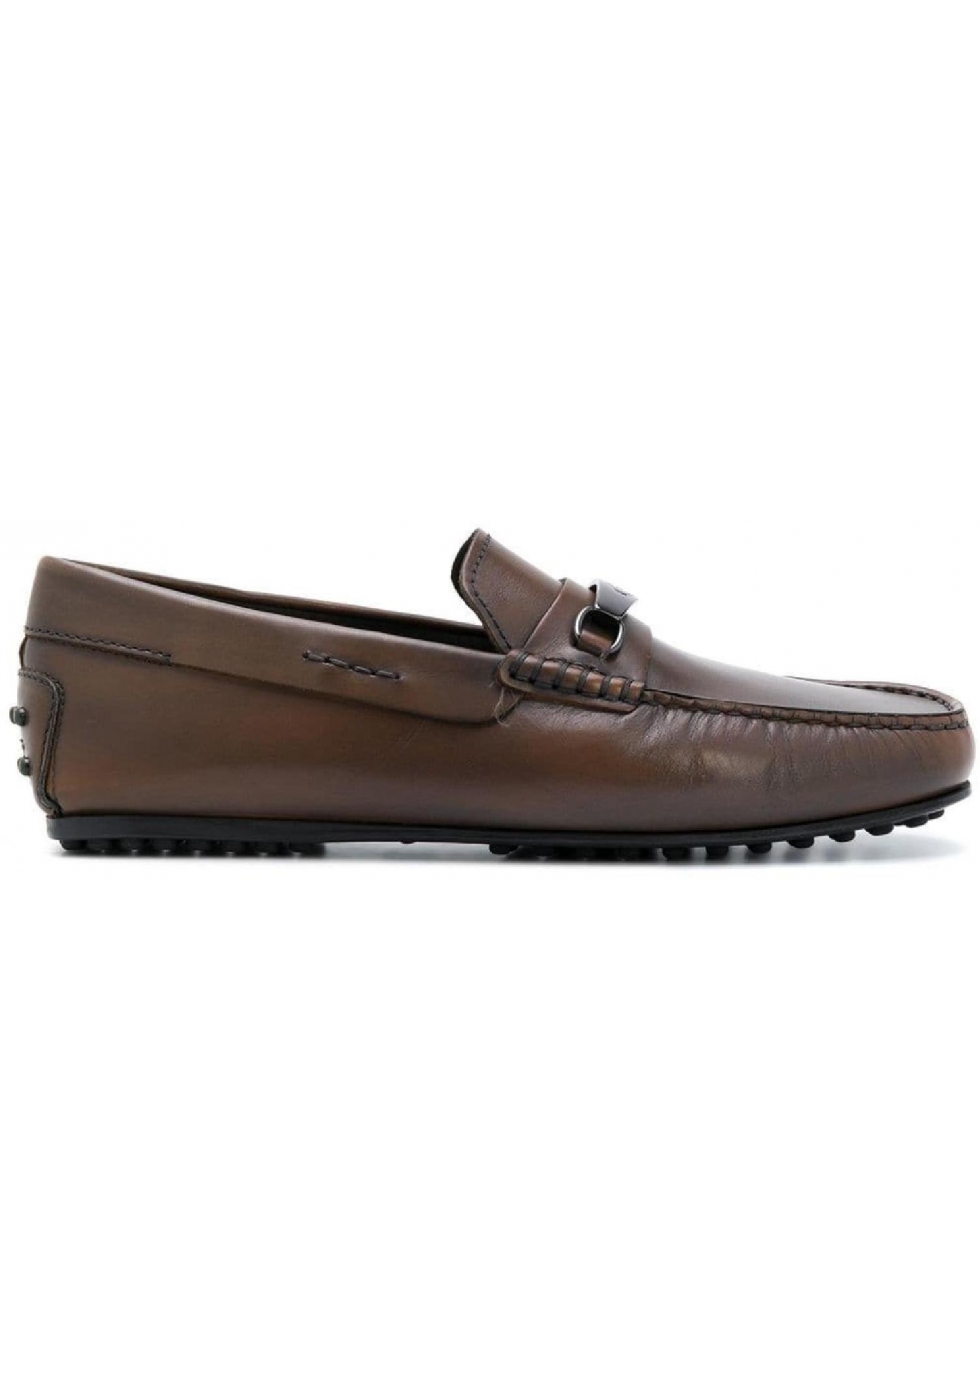 Tod's men's moccasins in Chocolate Leather with metallic buckle ...